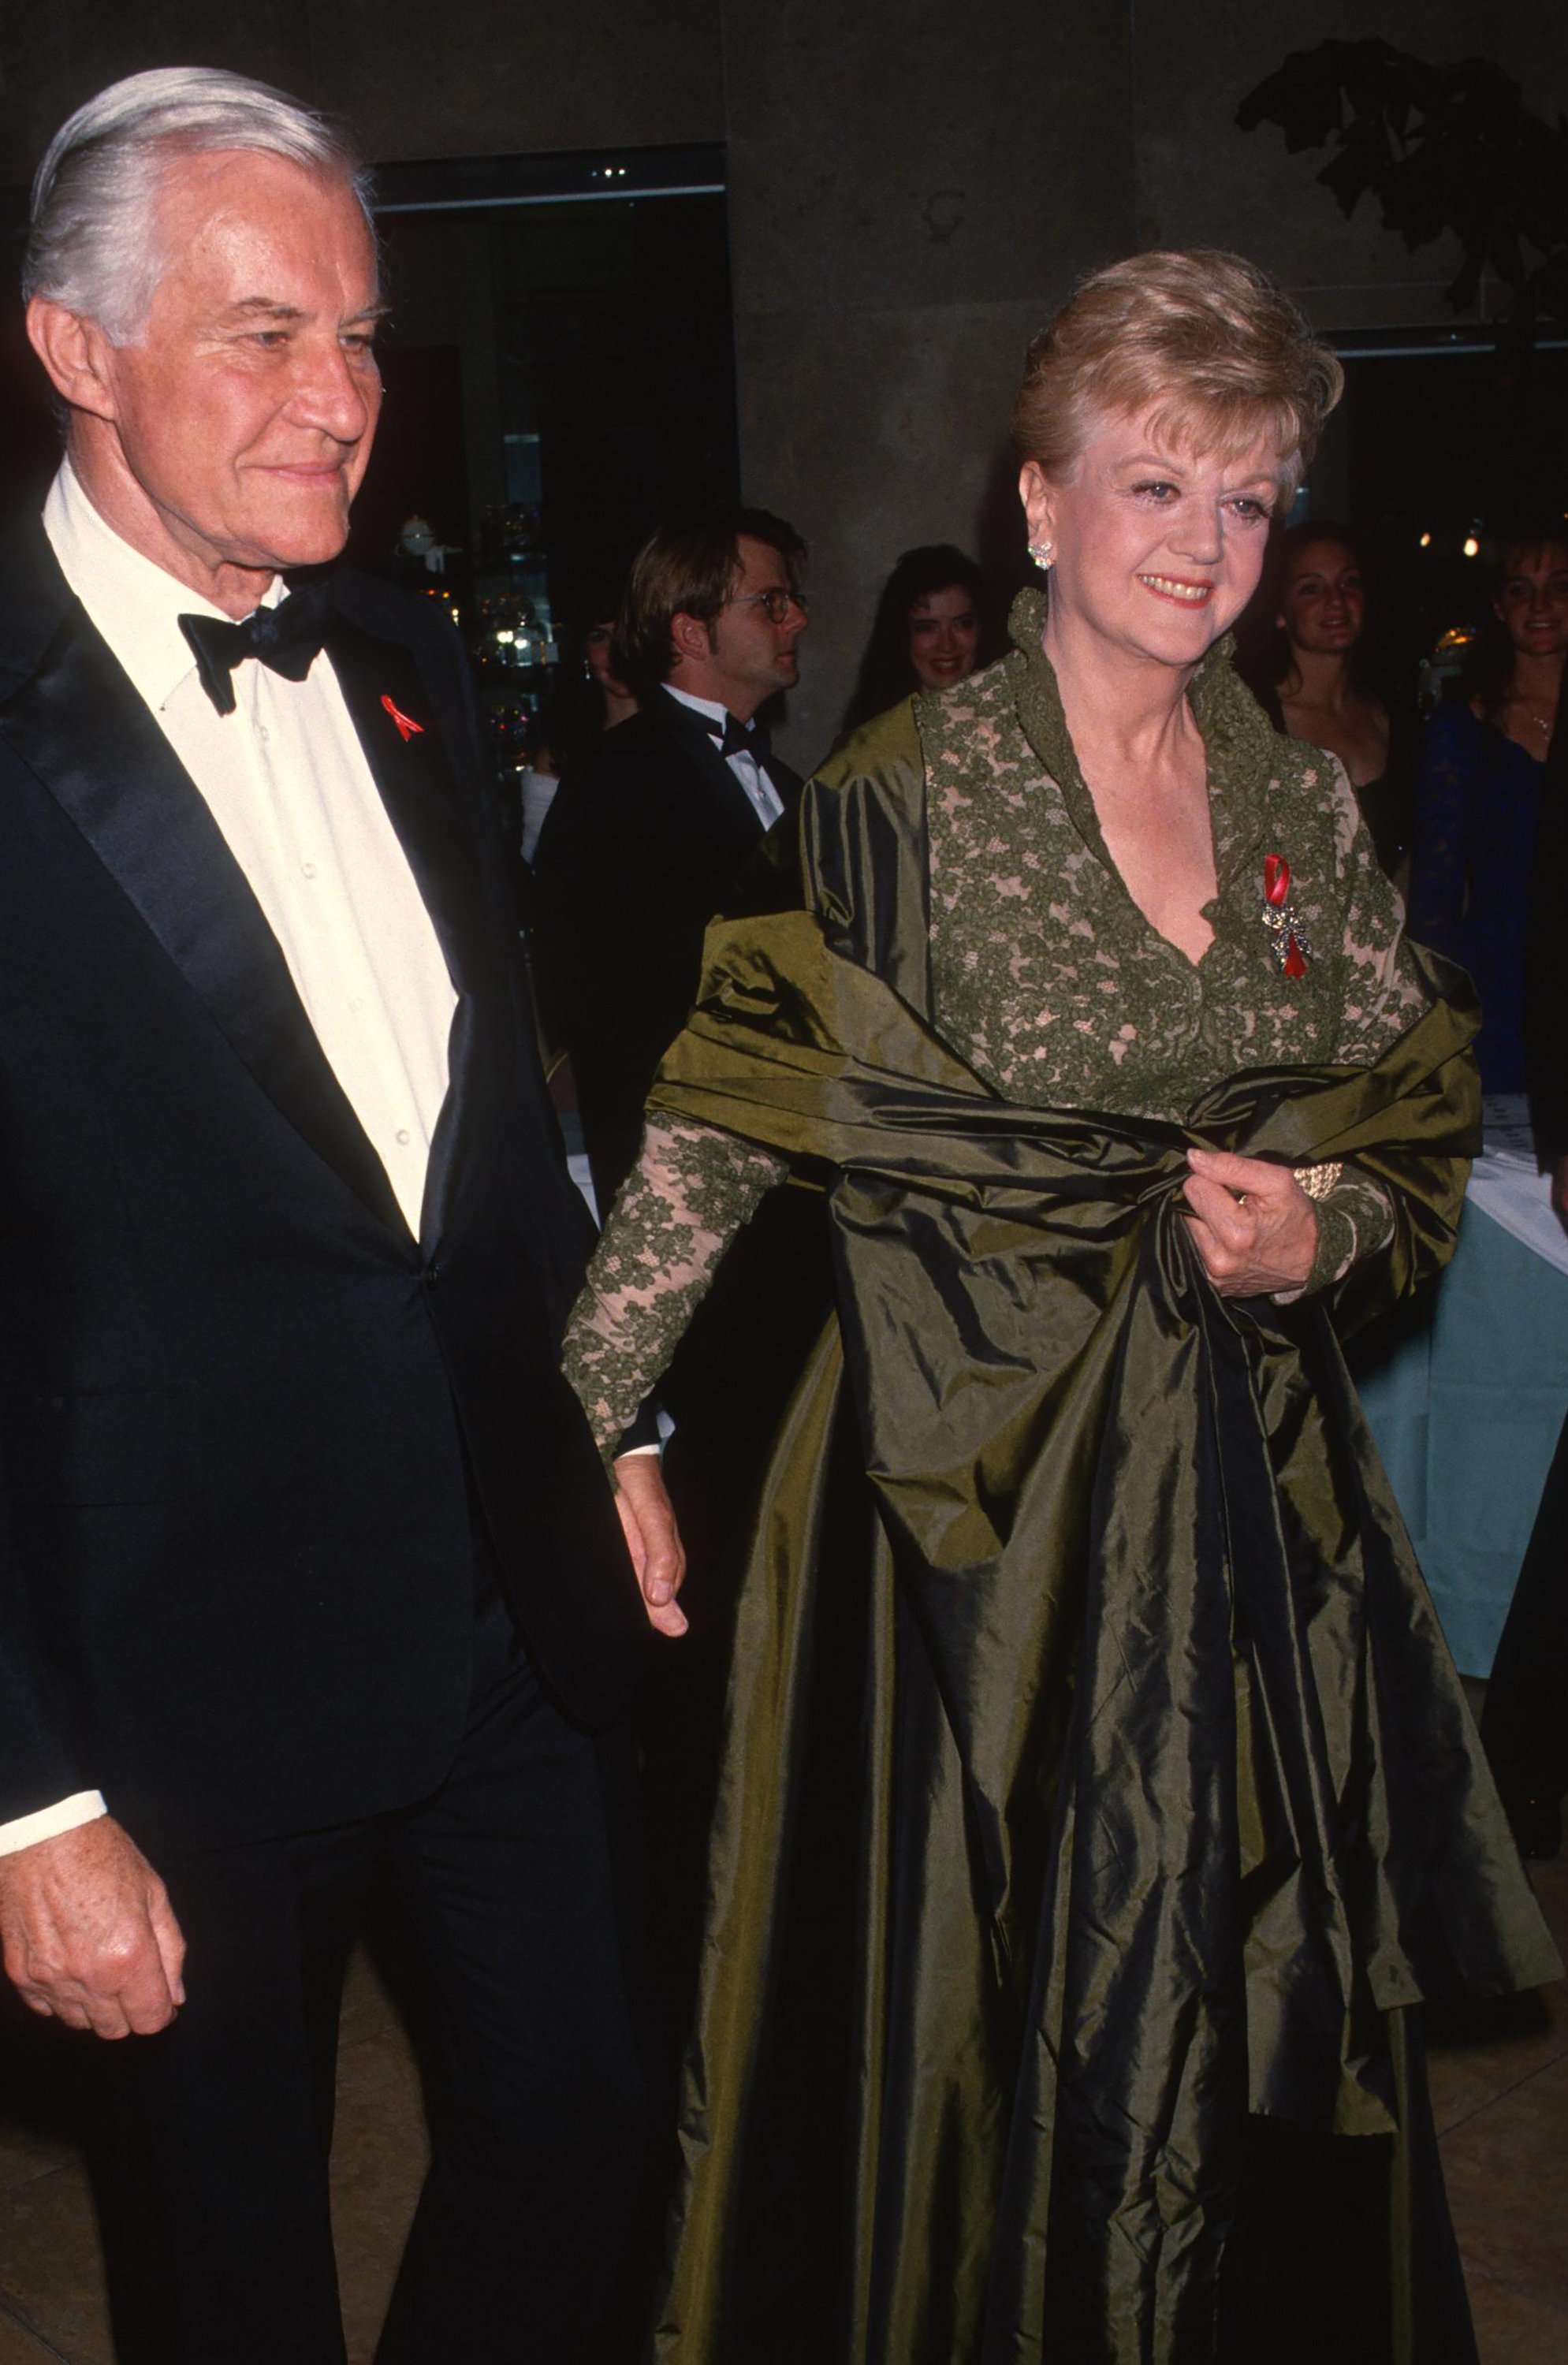 Peter Shaw and Angela Lansbury at the American Ireland Fund Heritage Awards Dinner Honoring the actress in Beverly Hills, California on November 4, 1993 | Source: Getty Images